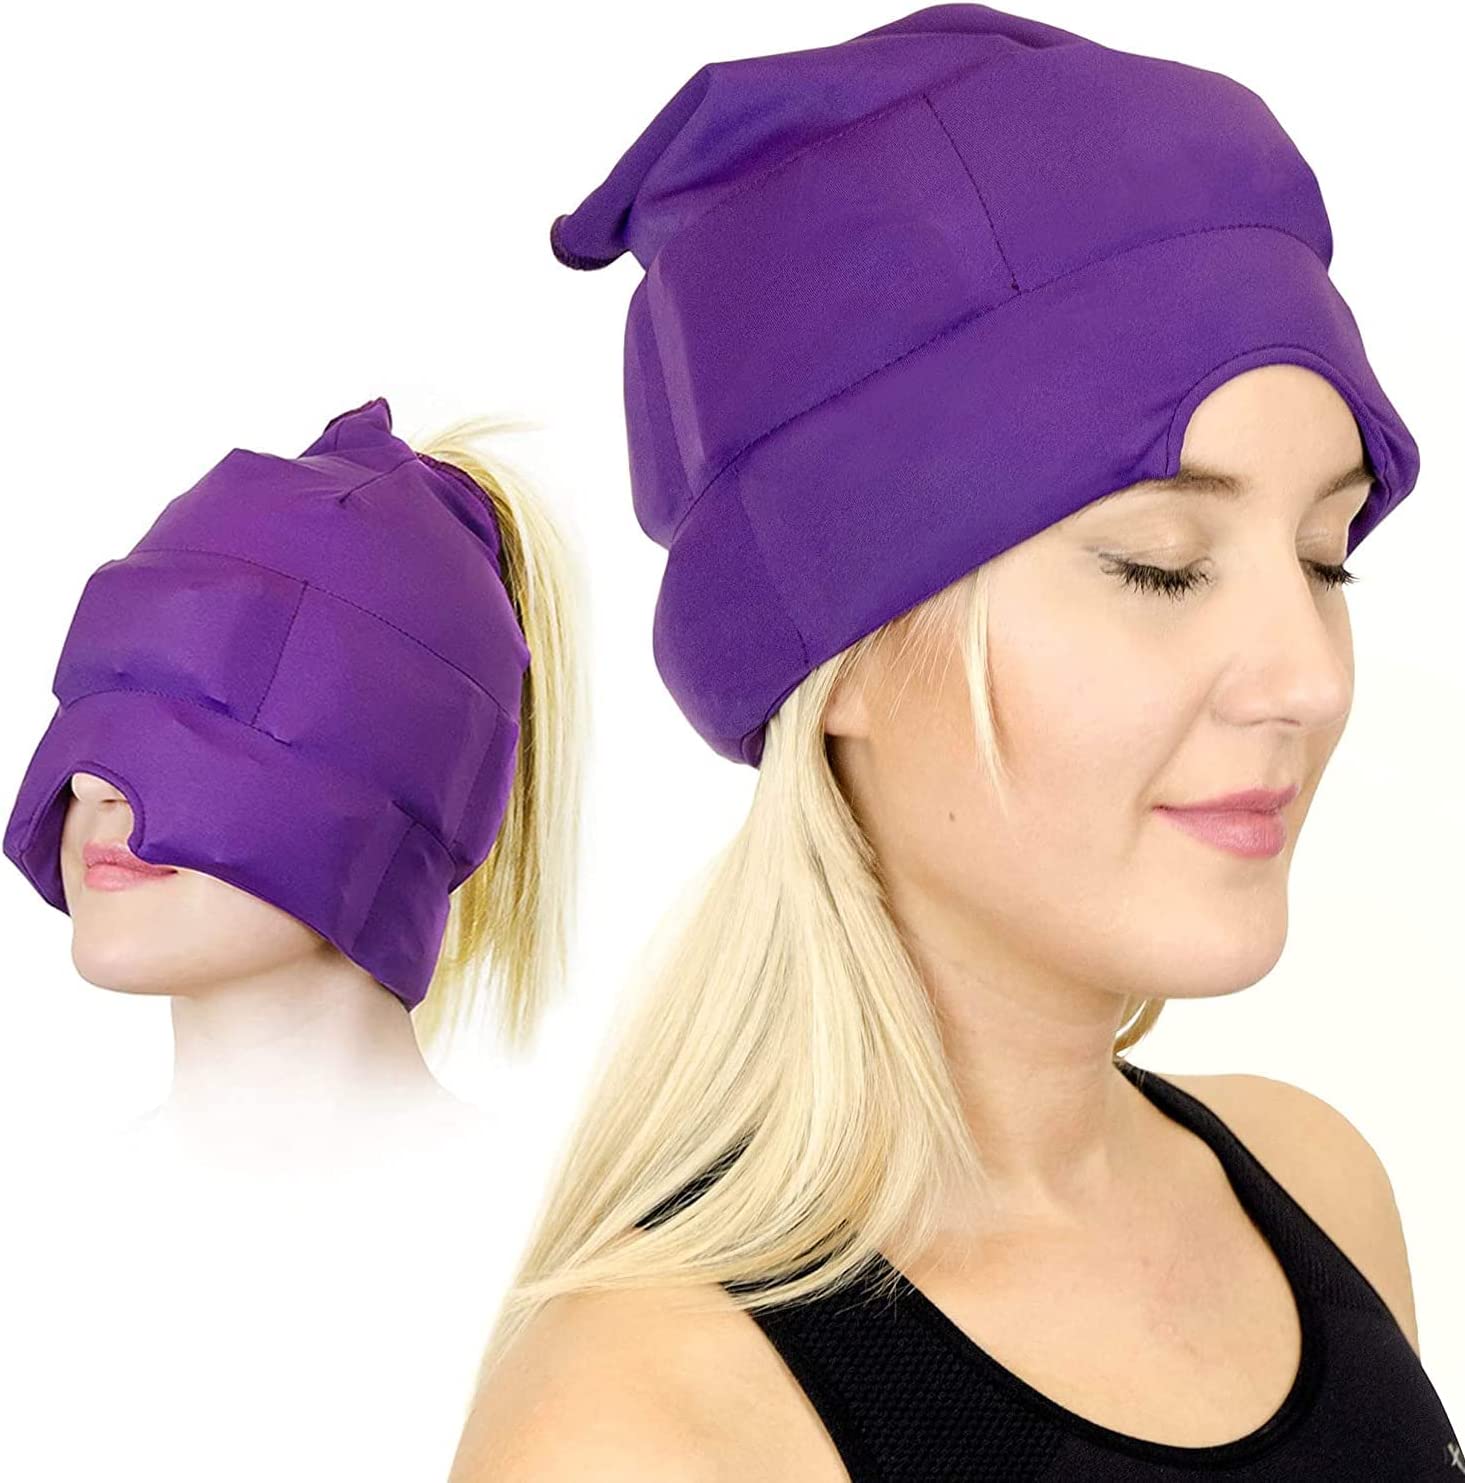 Review of Headache and Migraine Relief Cap